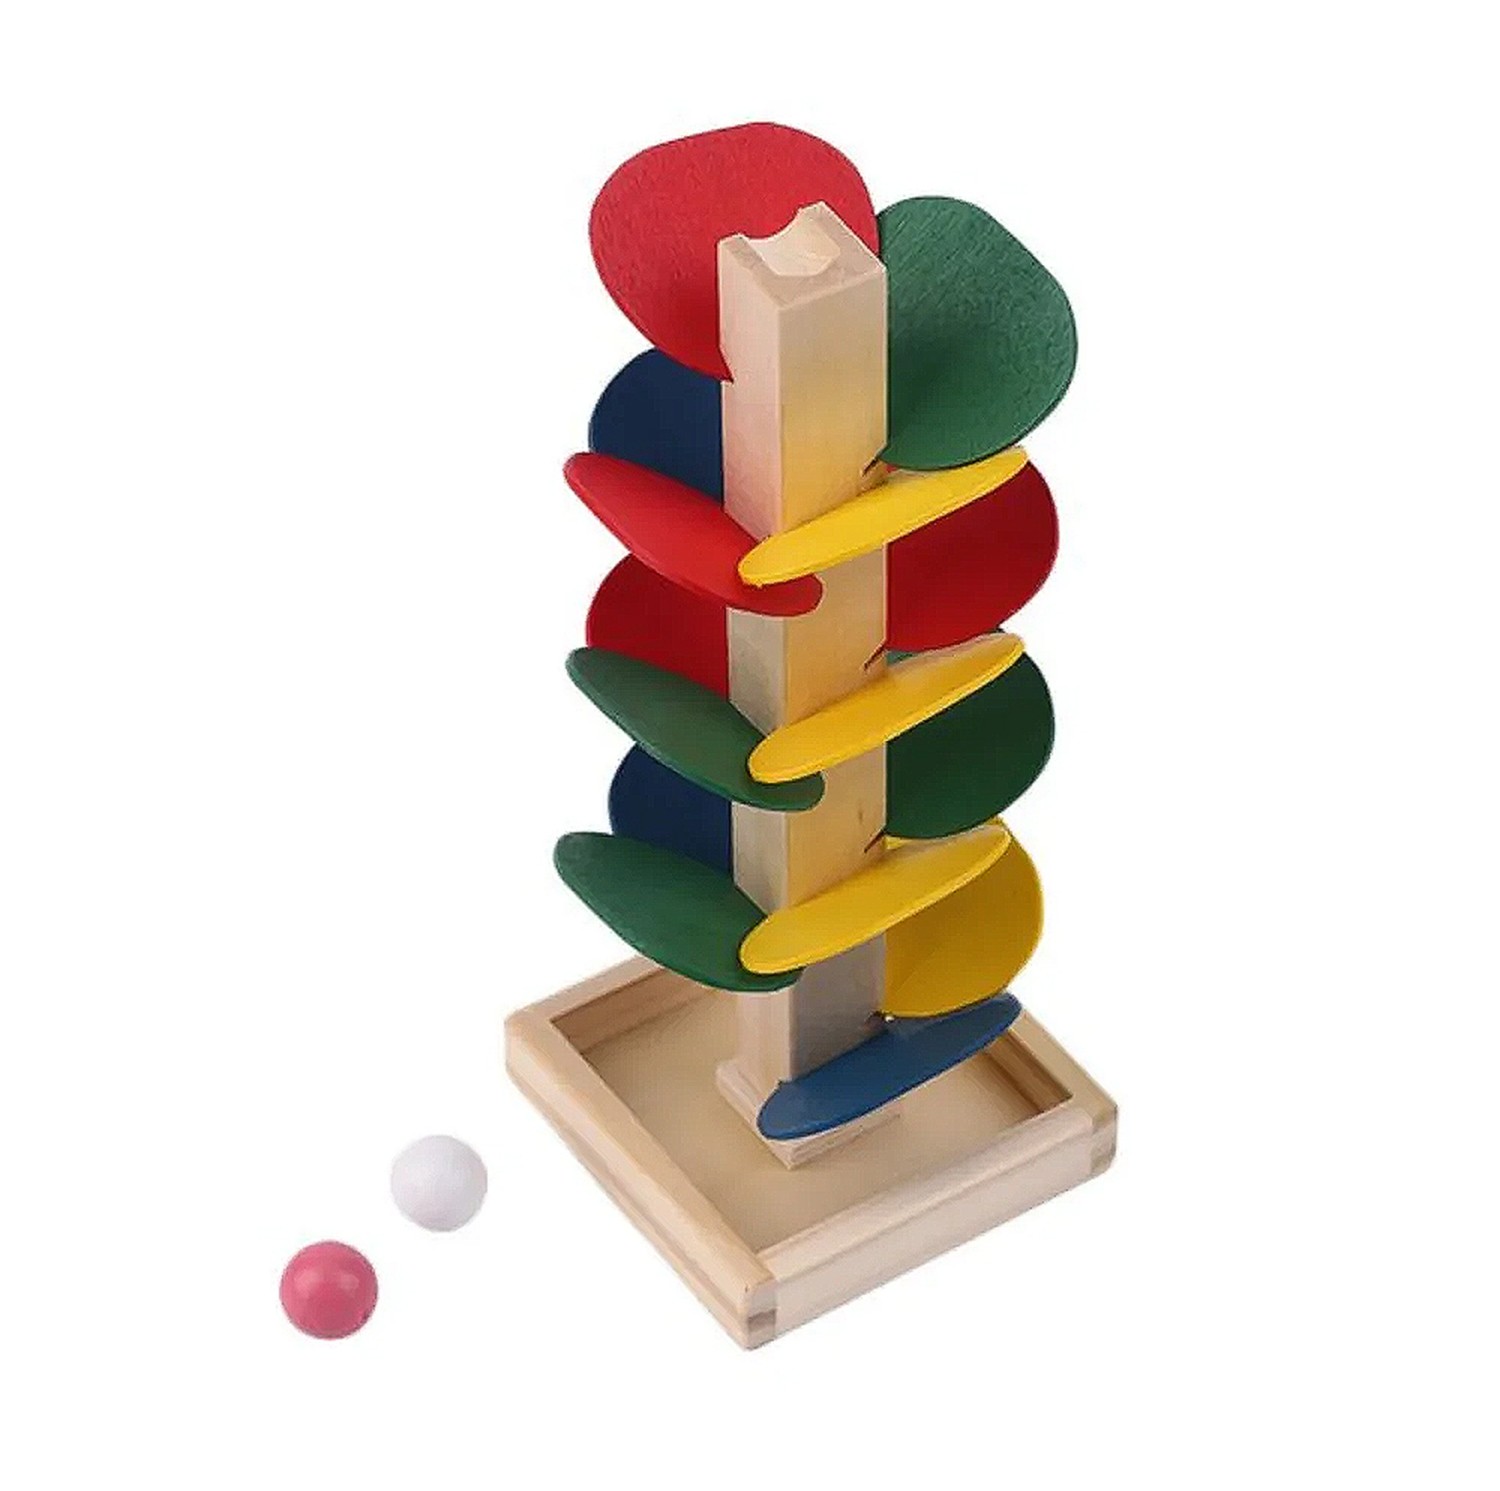 Marble Tree - Wooden Tree Blocks Marble Ball Run Track Game Educational Kids Toy